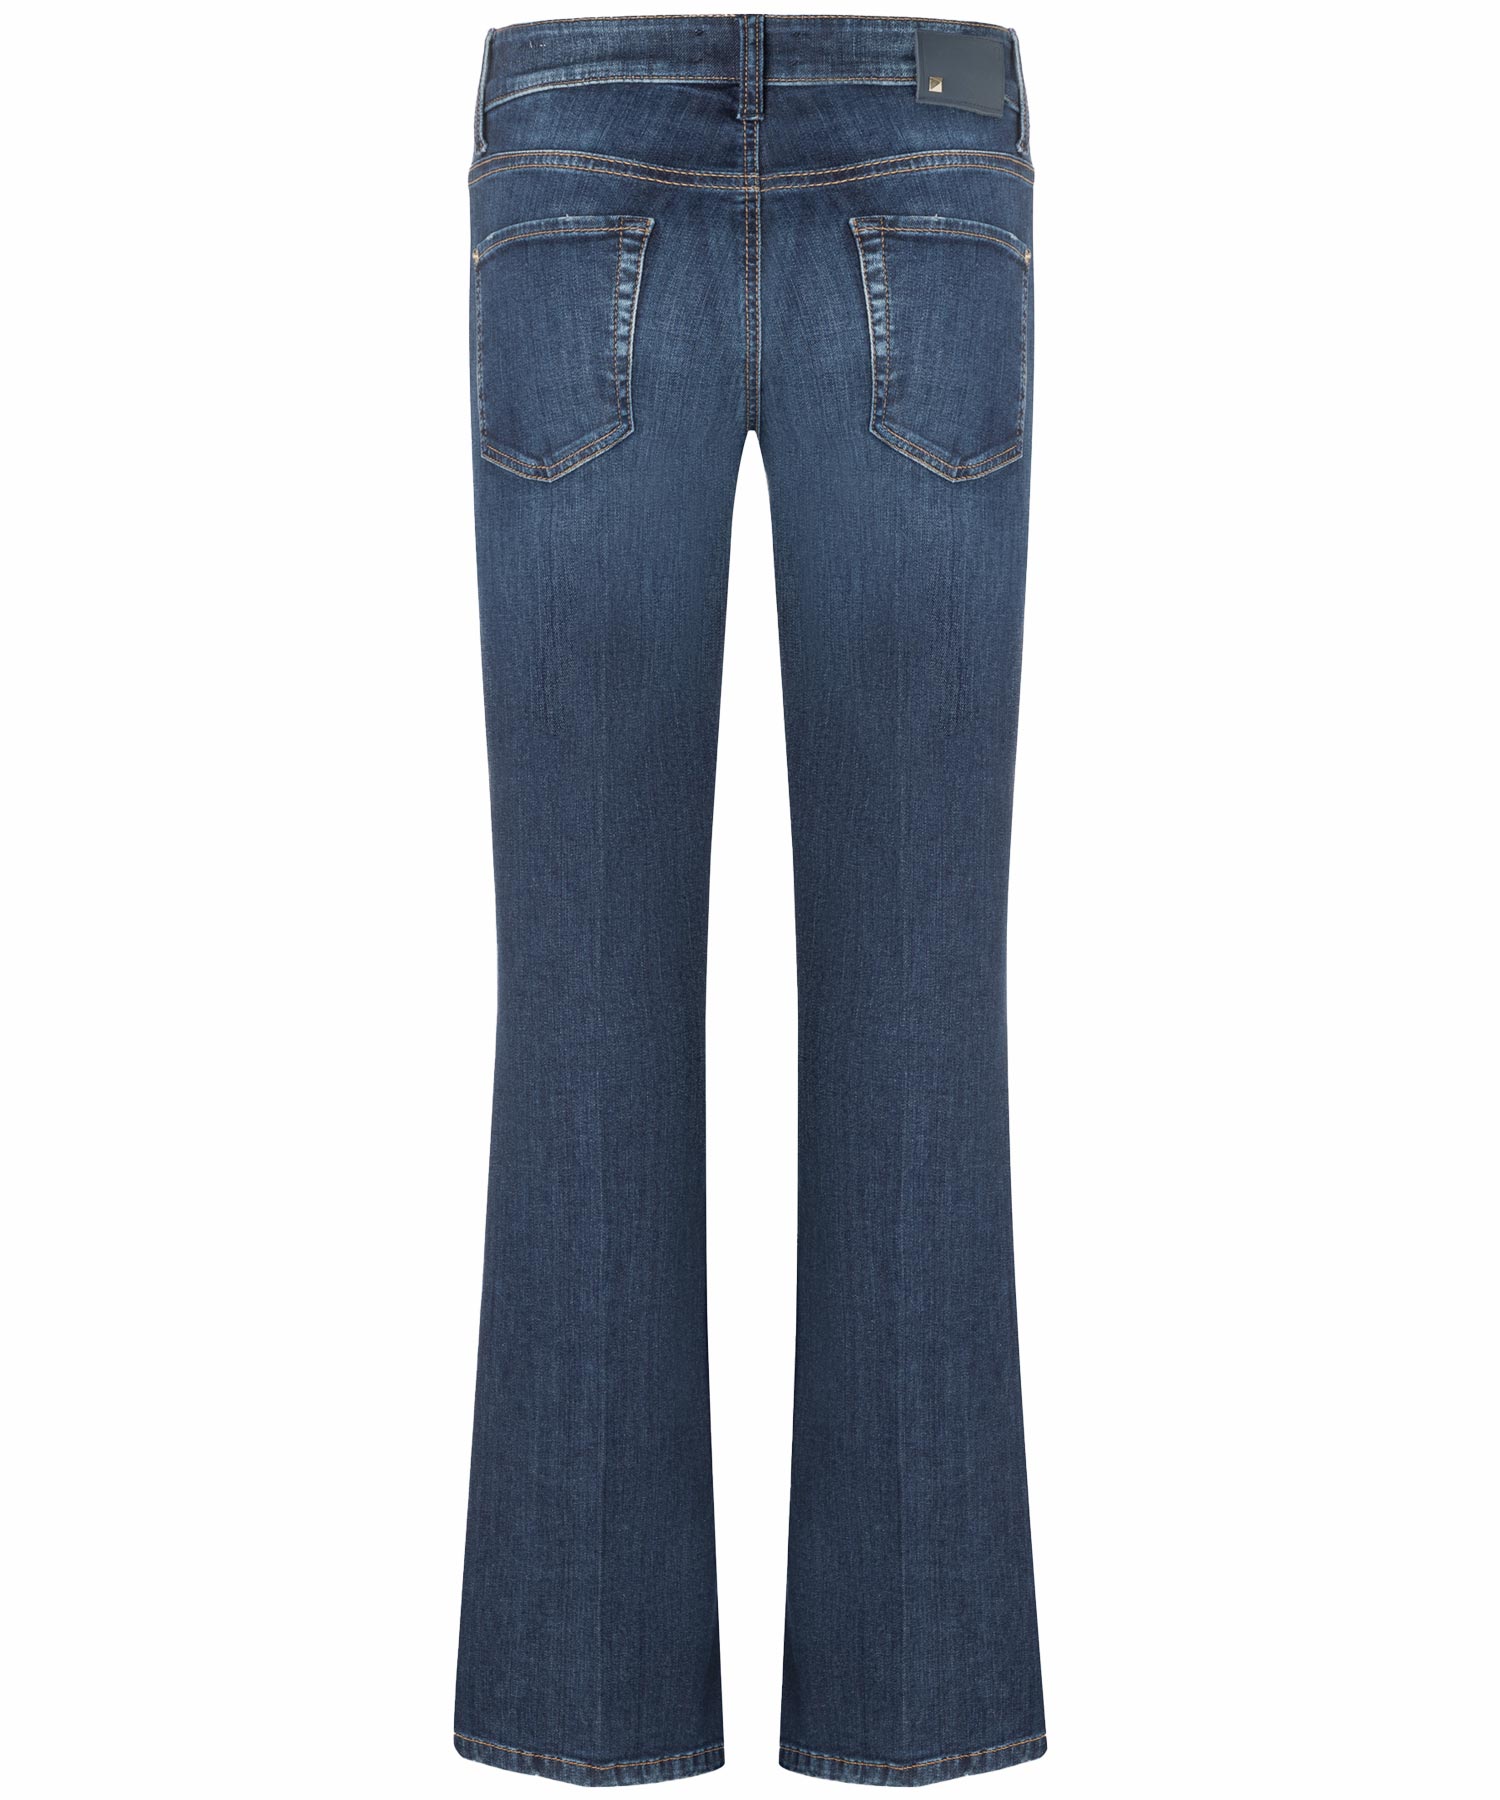 Cambio Jeans Paris flared in blue